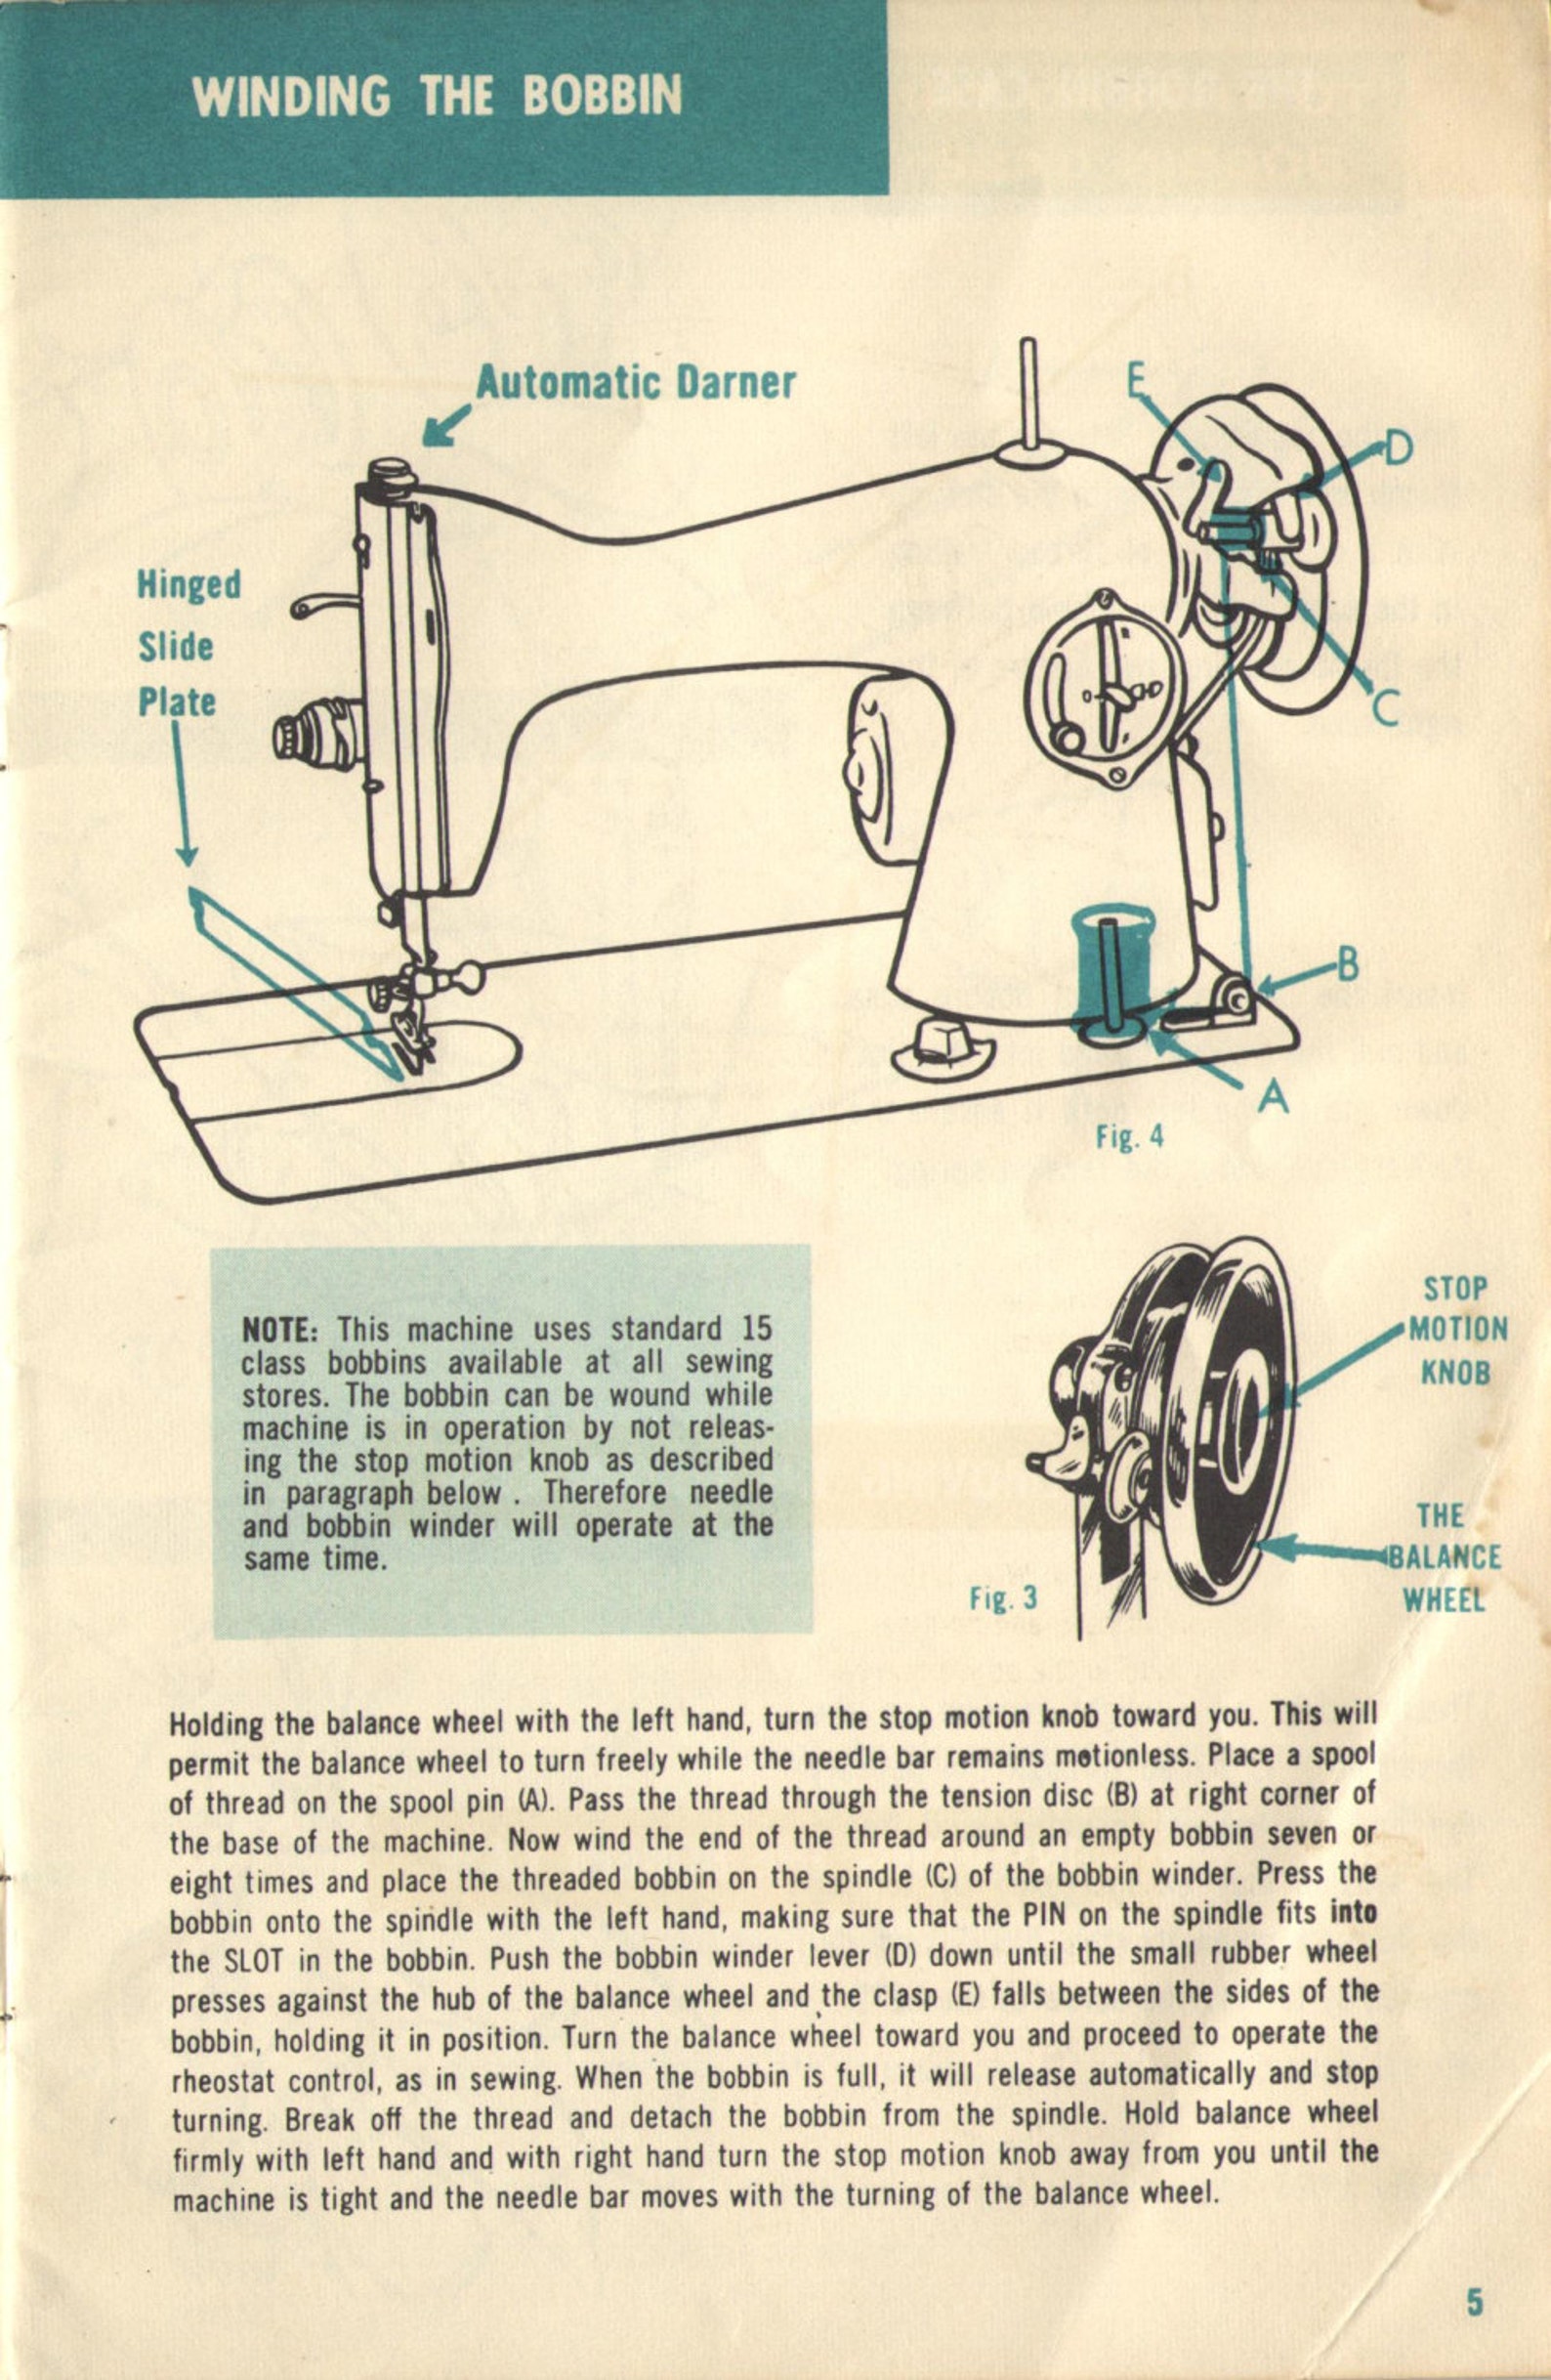 MORSE 200 Sewing Machine owners manual Precision Deluxe Super Etsy